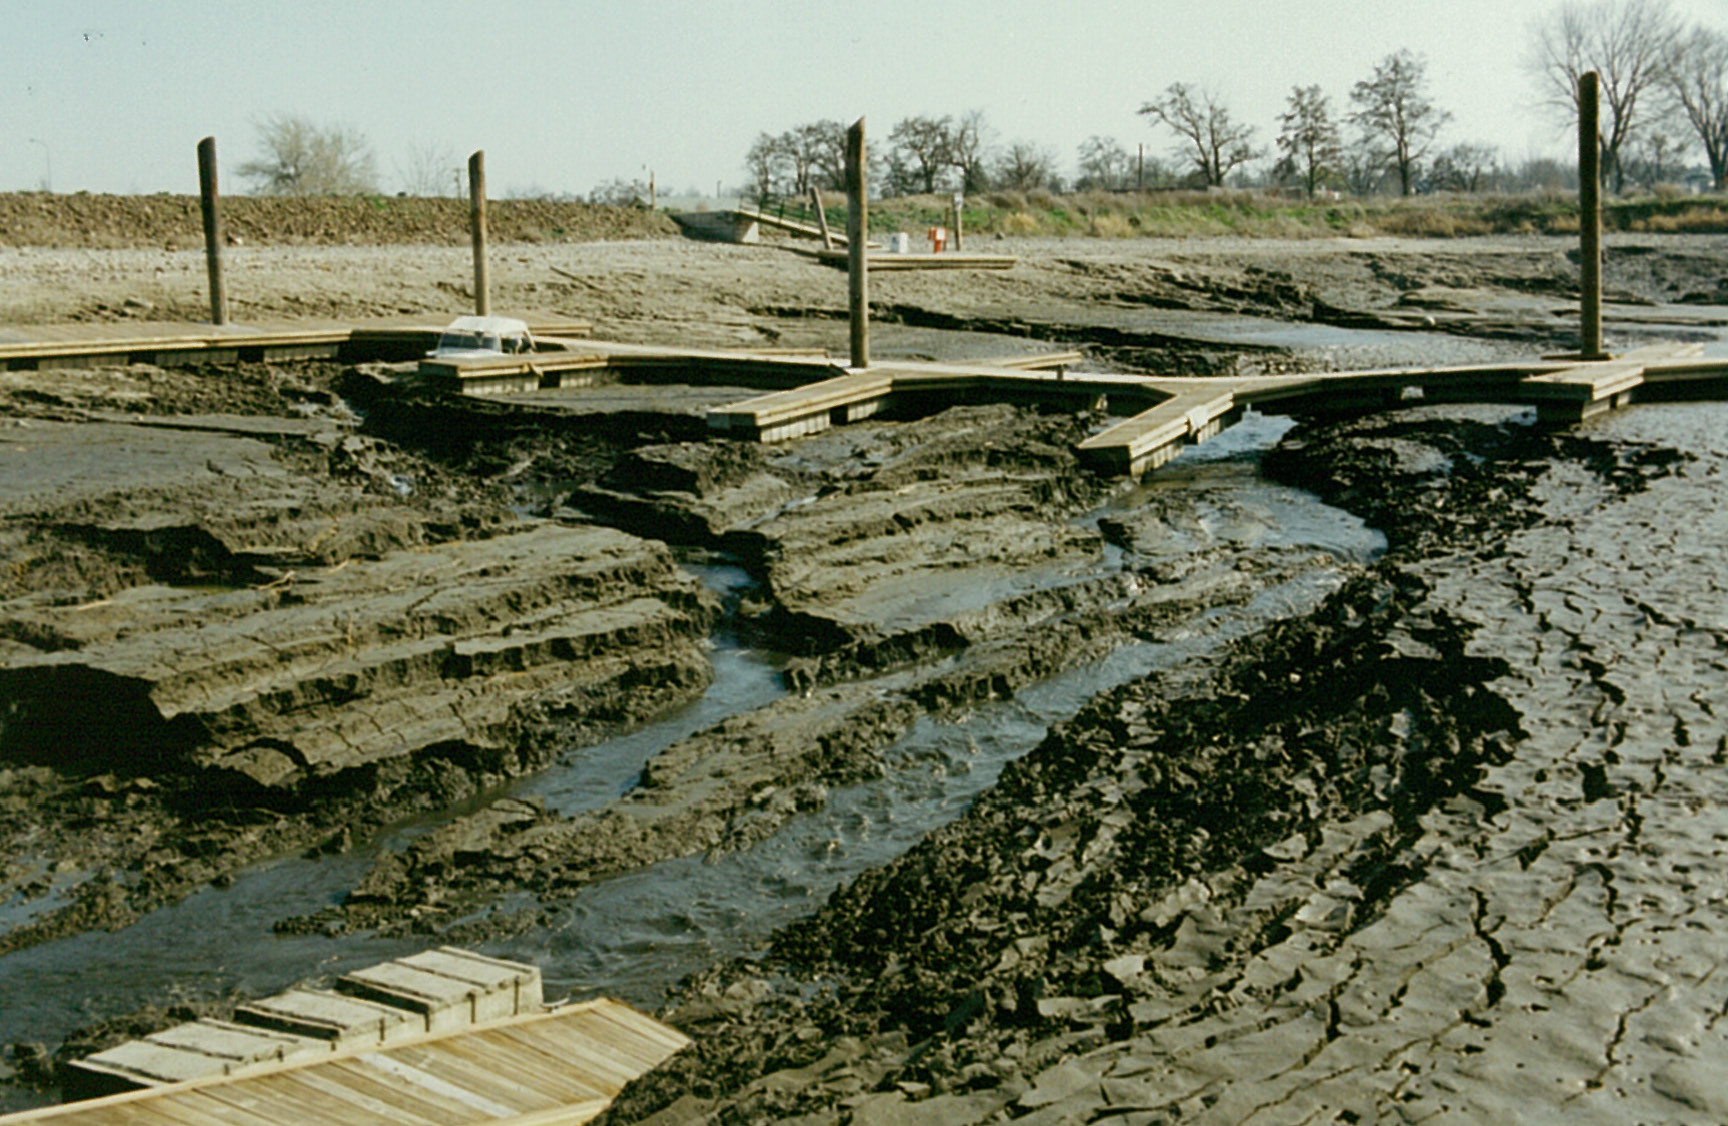 What are the effects of sediment buildup in a river basin?